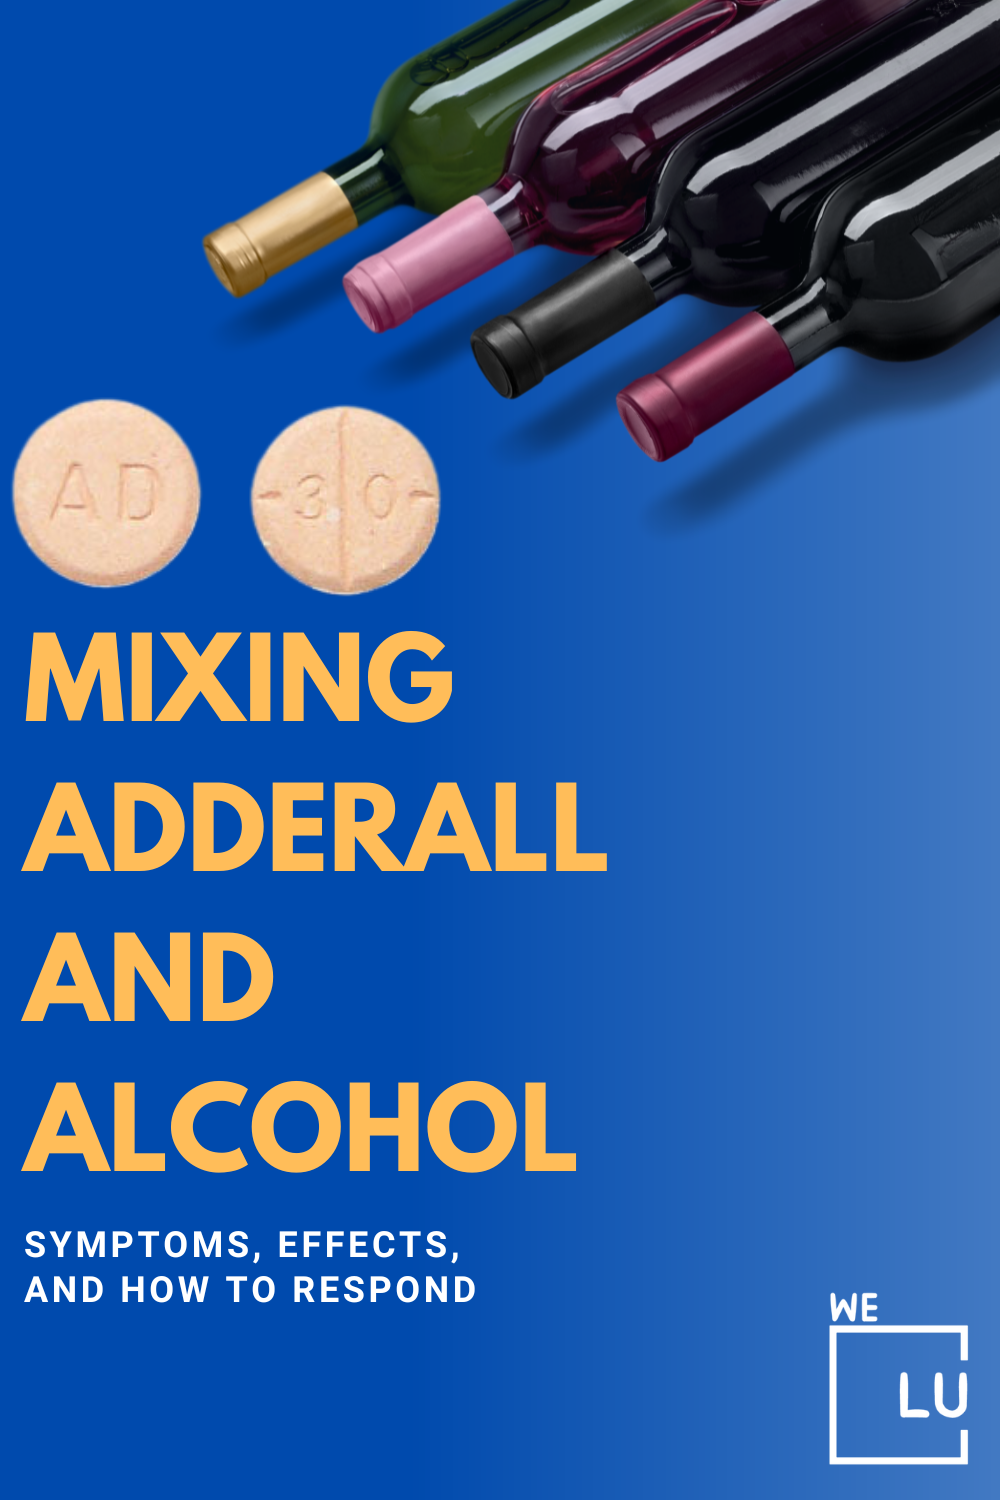 The Dangers of Mixing Adderall and Alcohol. Alcohol and Adderall Interaction. Can You Overdose on Adderall and Alcohol? Adderall and Alcohol Side Effects Treatment.